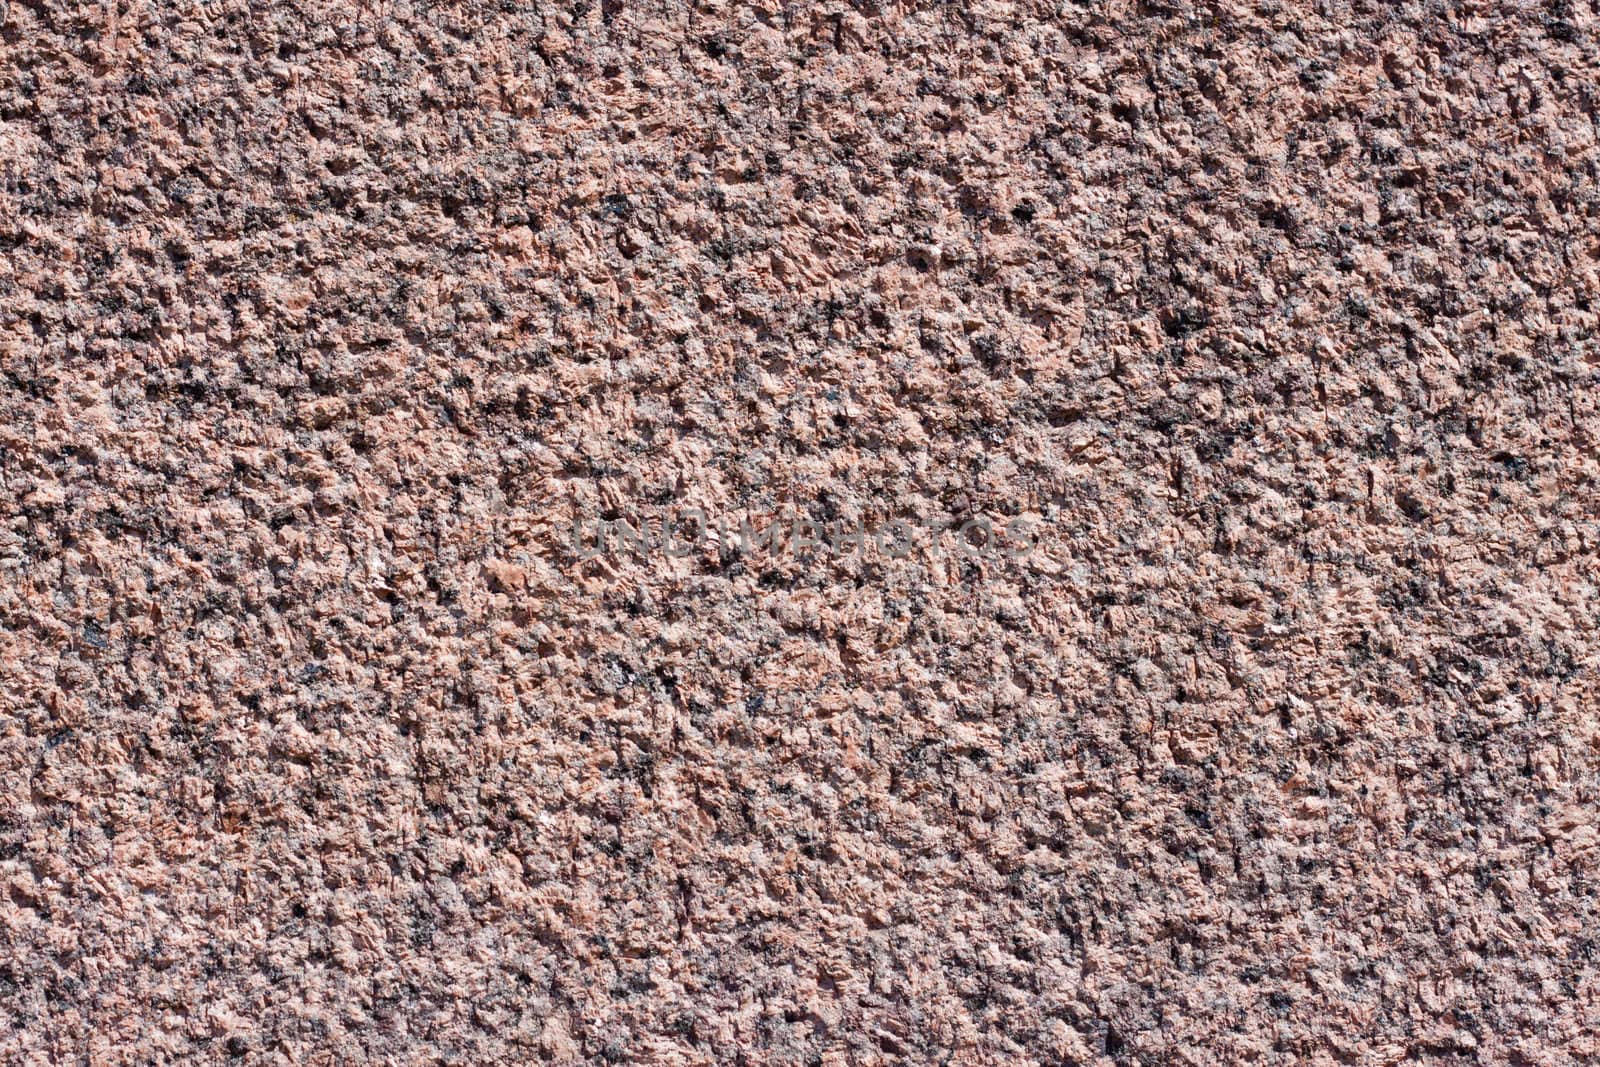 Granite texture with pink, black and grey colors